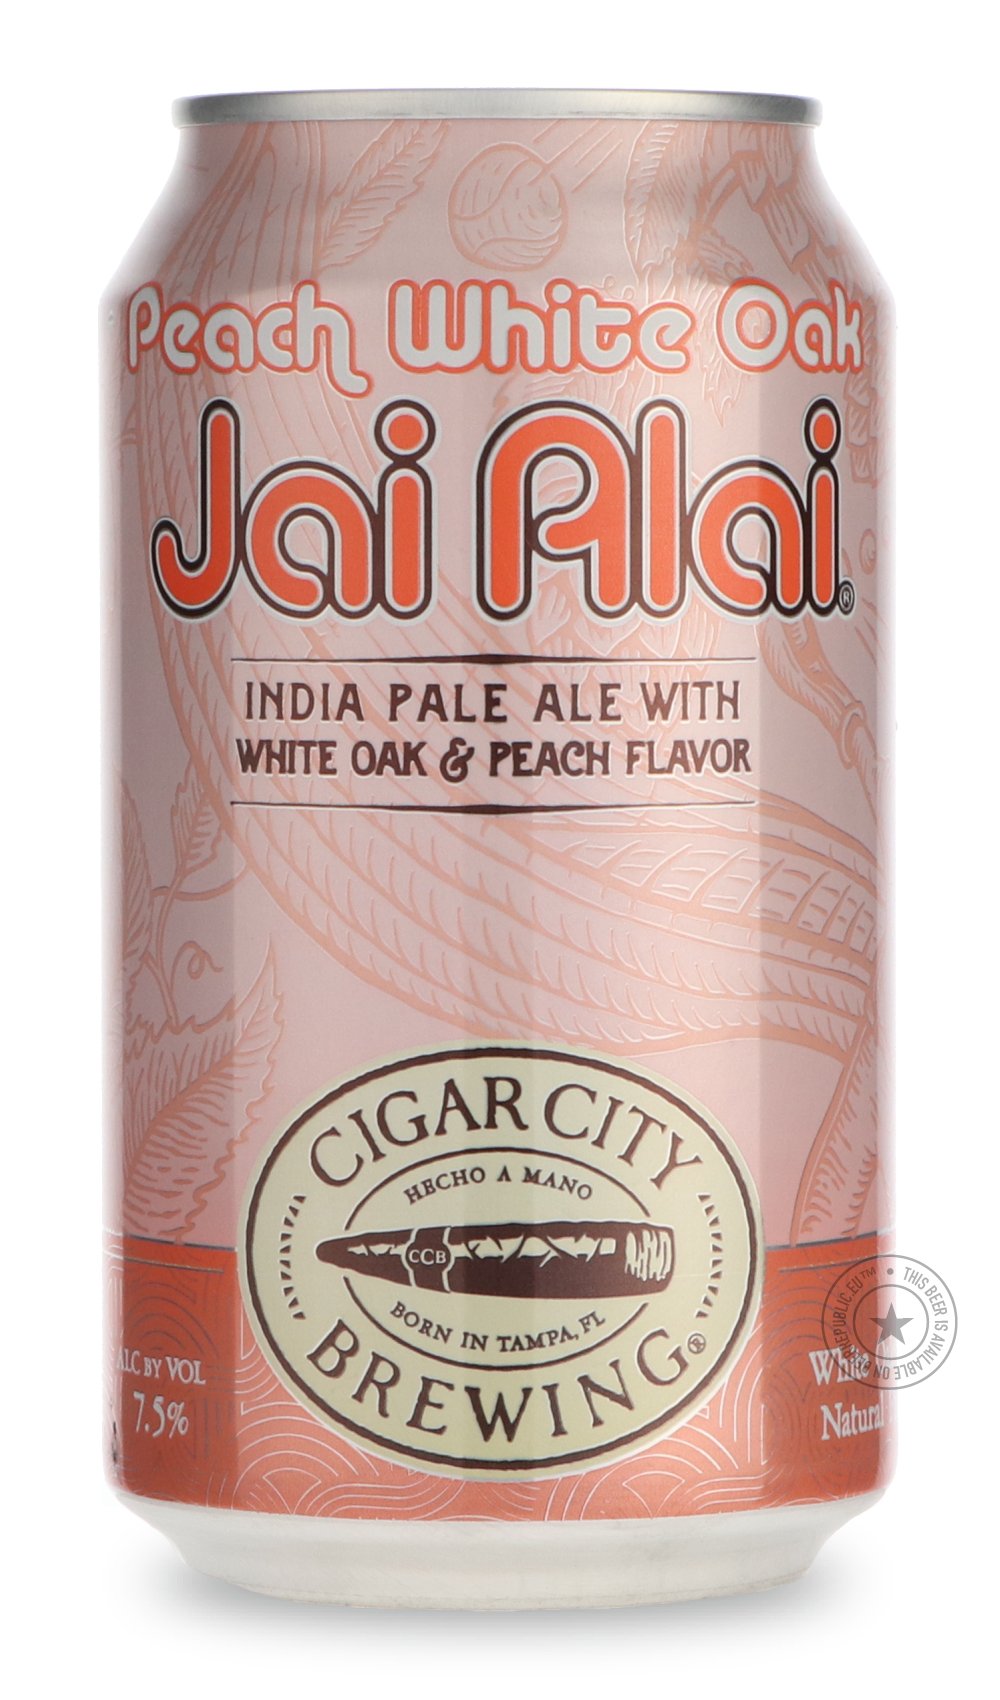 -Cigar City- Peach White Oak Jai Alai®-IPA- Only @ Beer Republic - The best online beer store for American & Canadian craft beer - Buy beer online from the USA and Canada - Bier online kopen - Amerikaans bier kopen - Craft beer store - Craft beer kopen - Amerikanisch bier kaufen - Bier online kaufen - Acheter biere online - IPA - Stout - Porter - New England IPA - Hazy IPA - Imperial Stout - Barrel Aged - Barrel Aged Imperial Stout - Brown - Dark beer - Blond - Blonde - Pilsner - Lager - Wheat - Weizen - Am